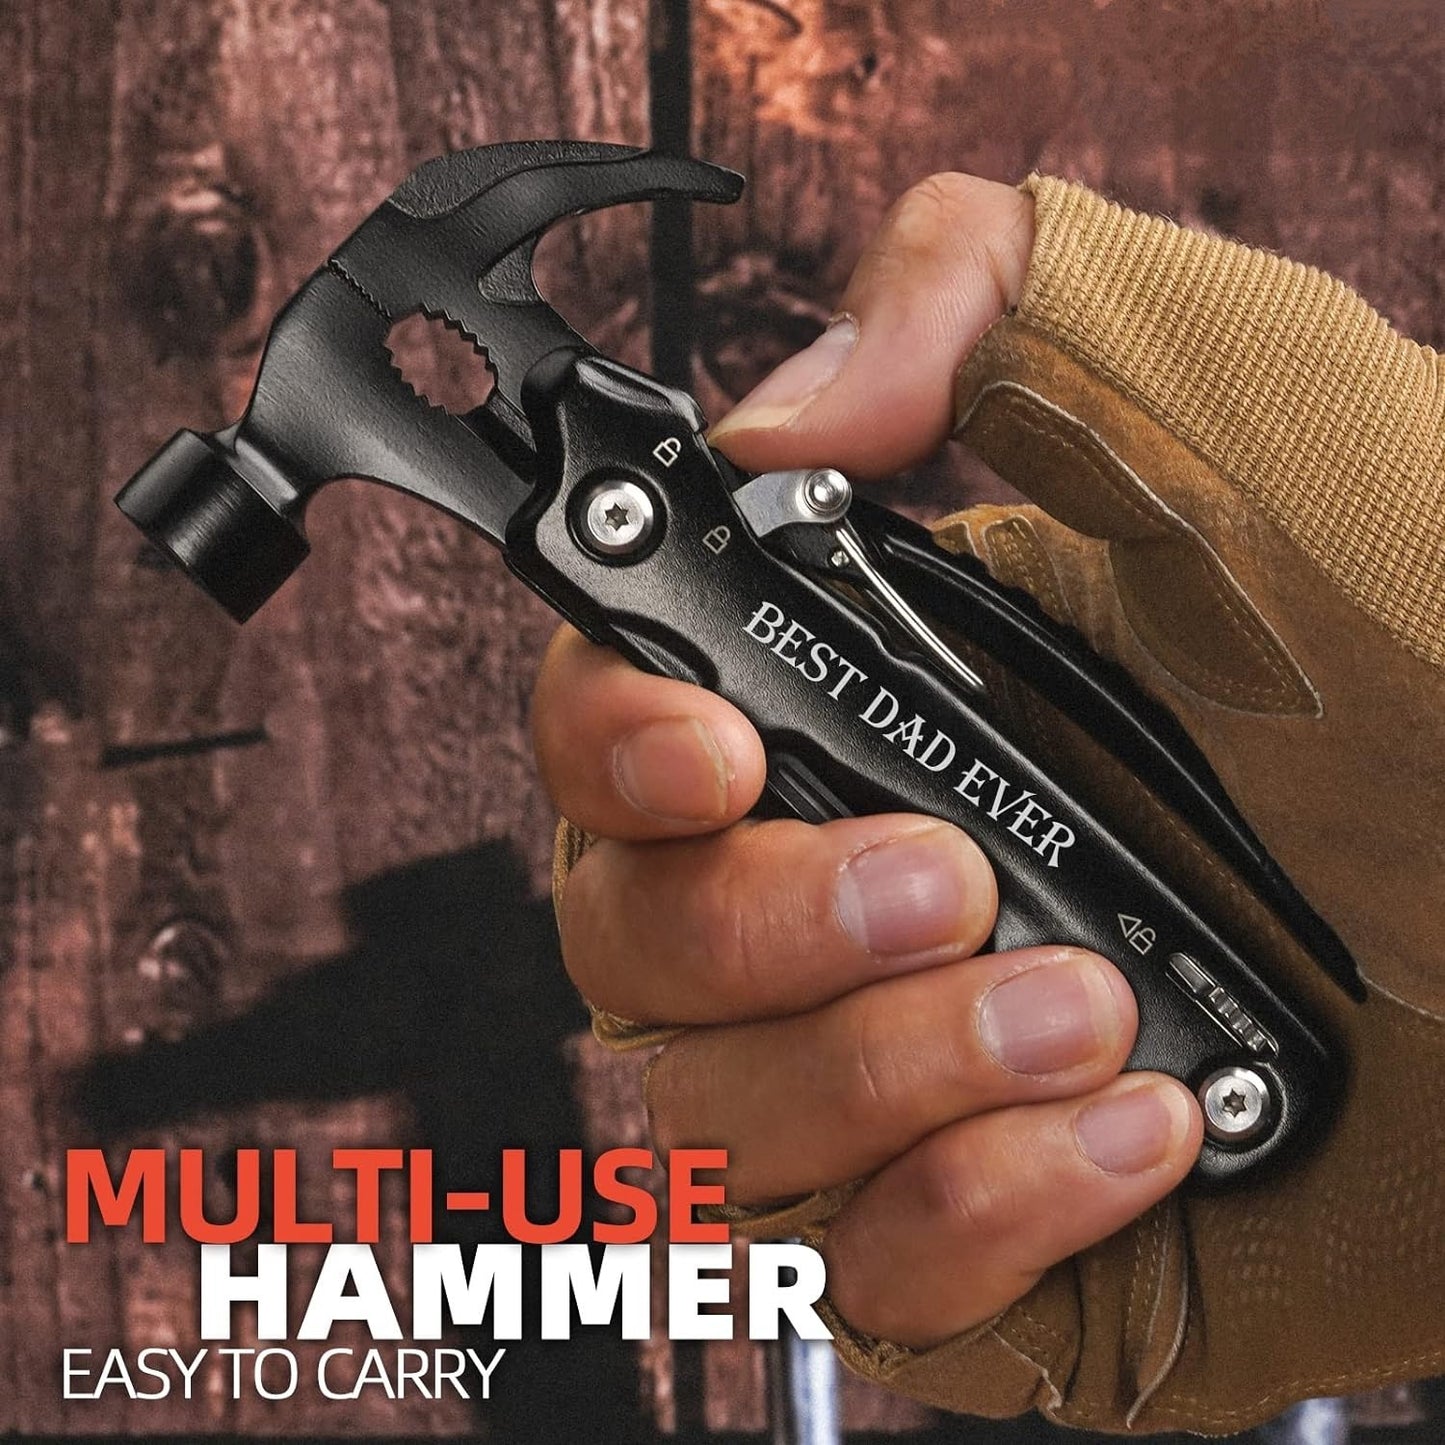 All-in-One Tools: 12-in-1 Mini Hammer Multitool - Father's Day Gifts from Kids - Cool Gadgets & Birthday Presents for Dad